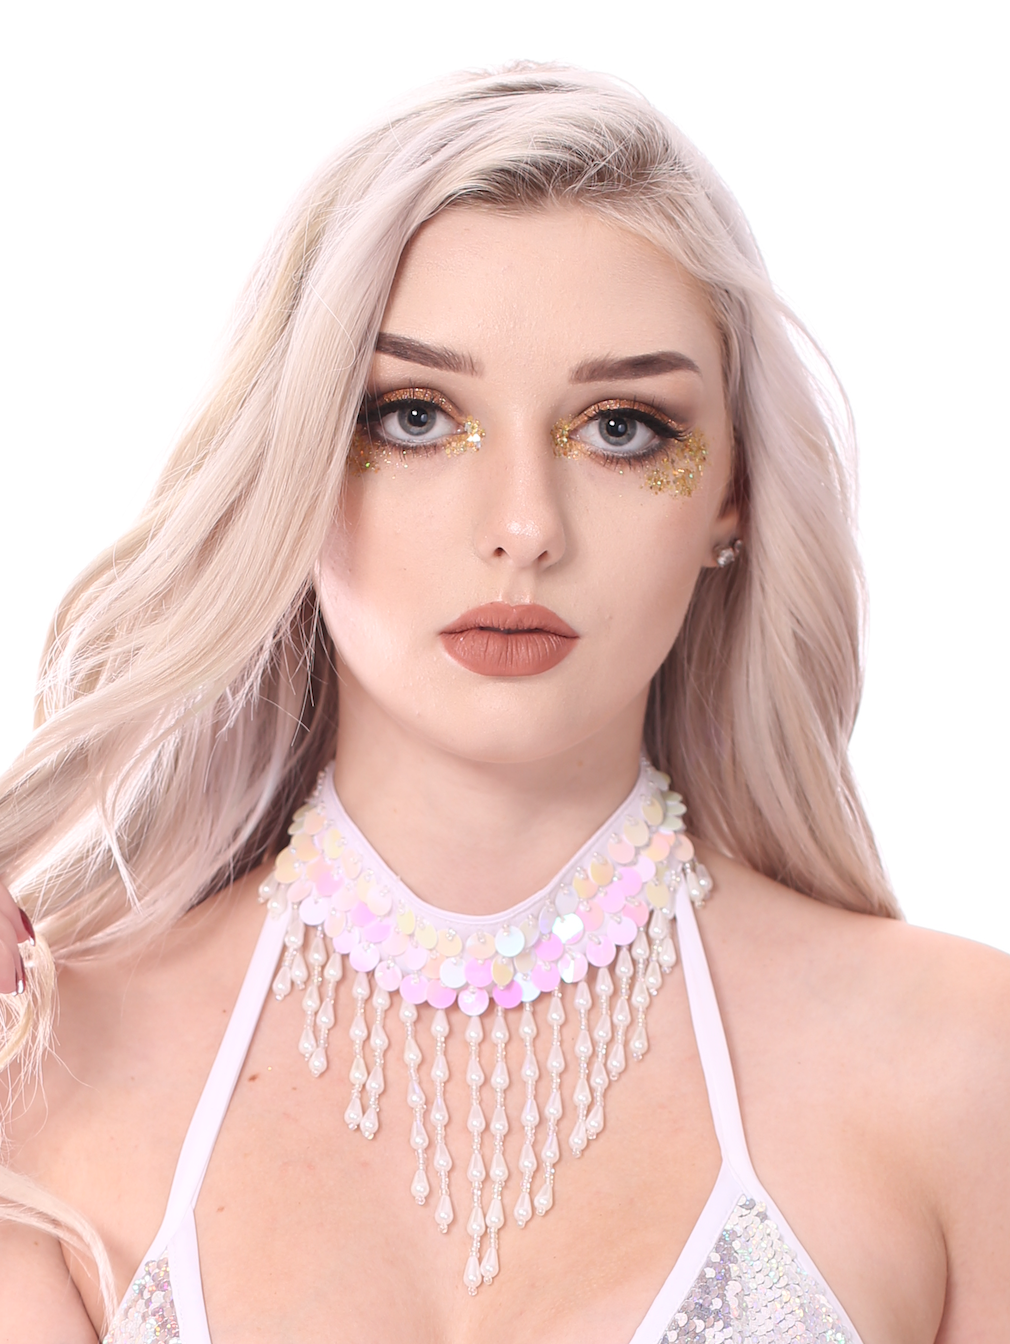 Spiral Hand Stitched Sequin Bodysuit Rave clothes,rave outfits,edc – THE  LUMI SHOP